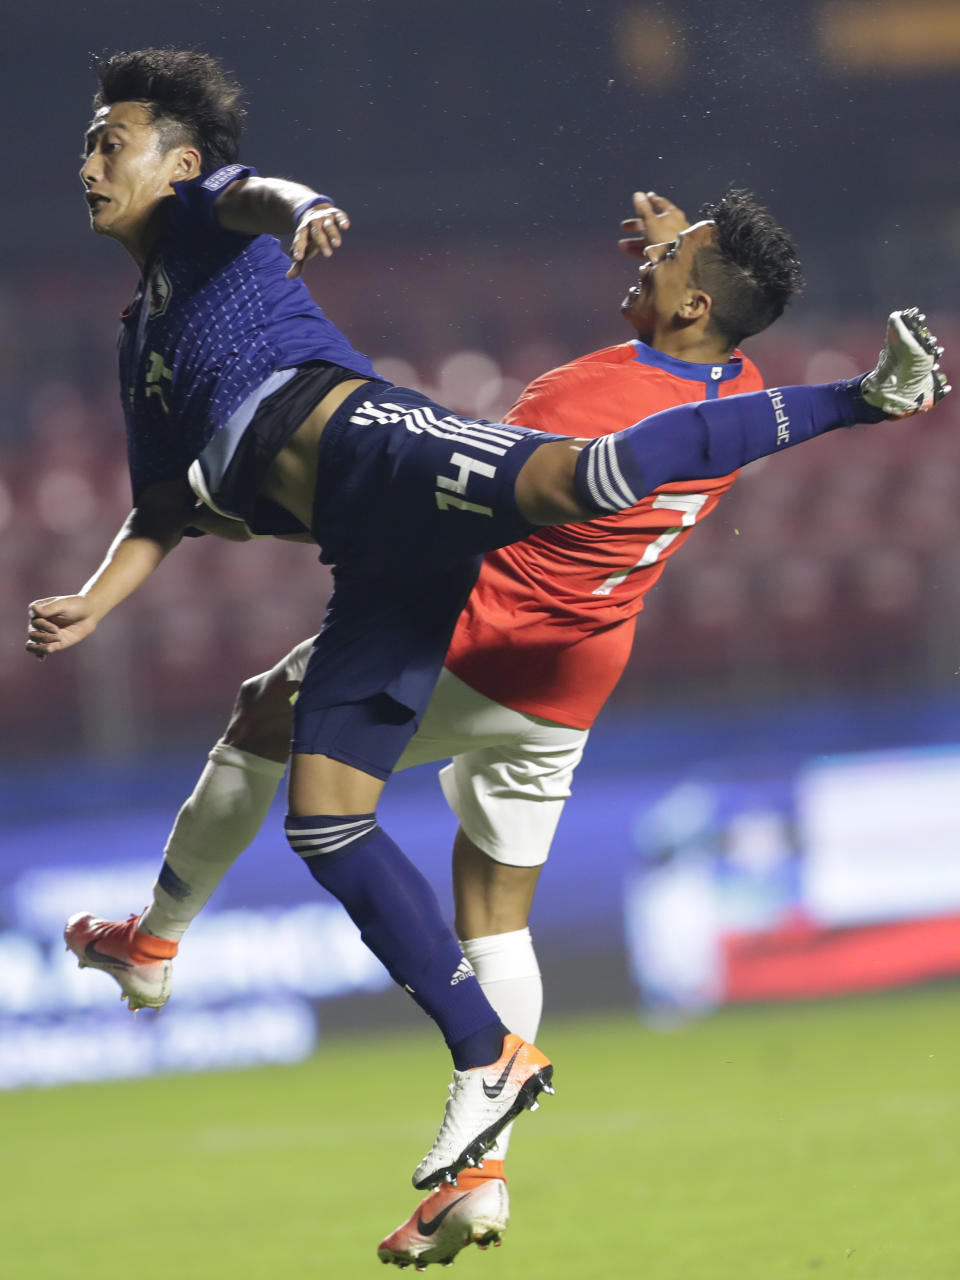 Japan's Teruki Hara, front, and Chile's Alexis Sanchez jump for the ball during a Copa America Group C soccer match at the Morumbi stadium in Sao Paulo, Brazil, Monday, June 17, 2019. (AP Photo/Andre Penner)